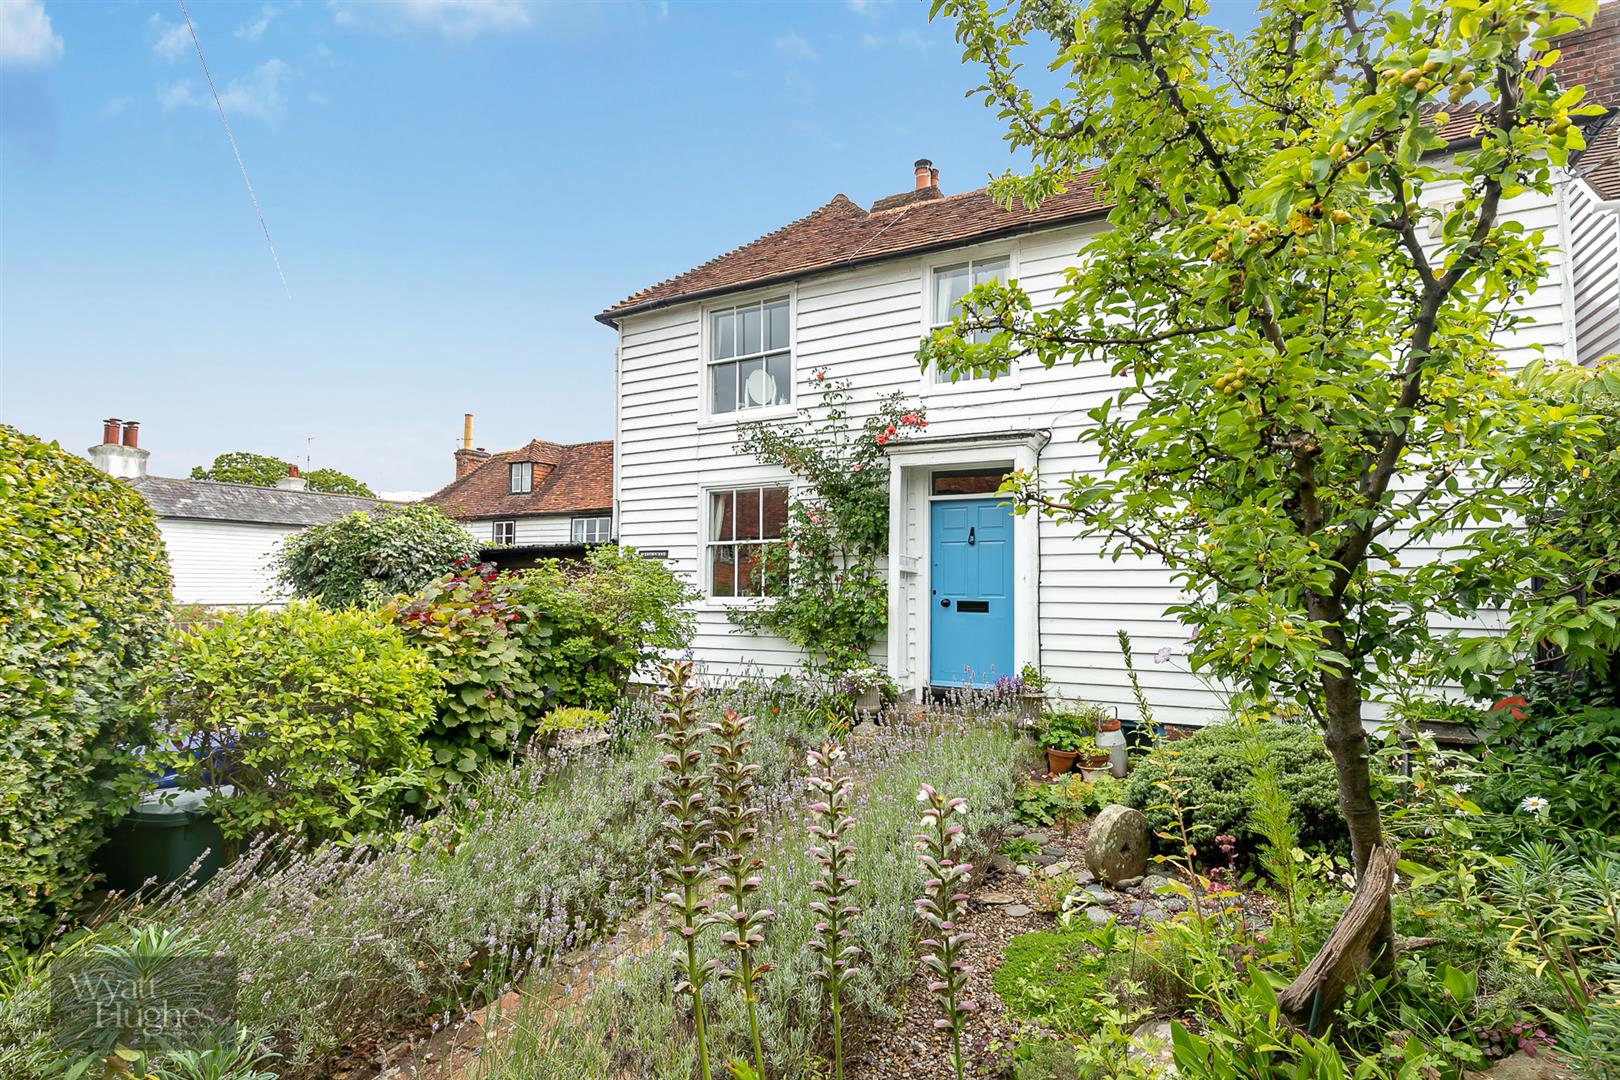 4 bed house for sale in High Street, Ticehurst, TN5 